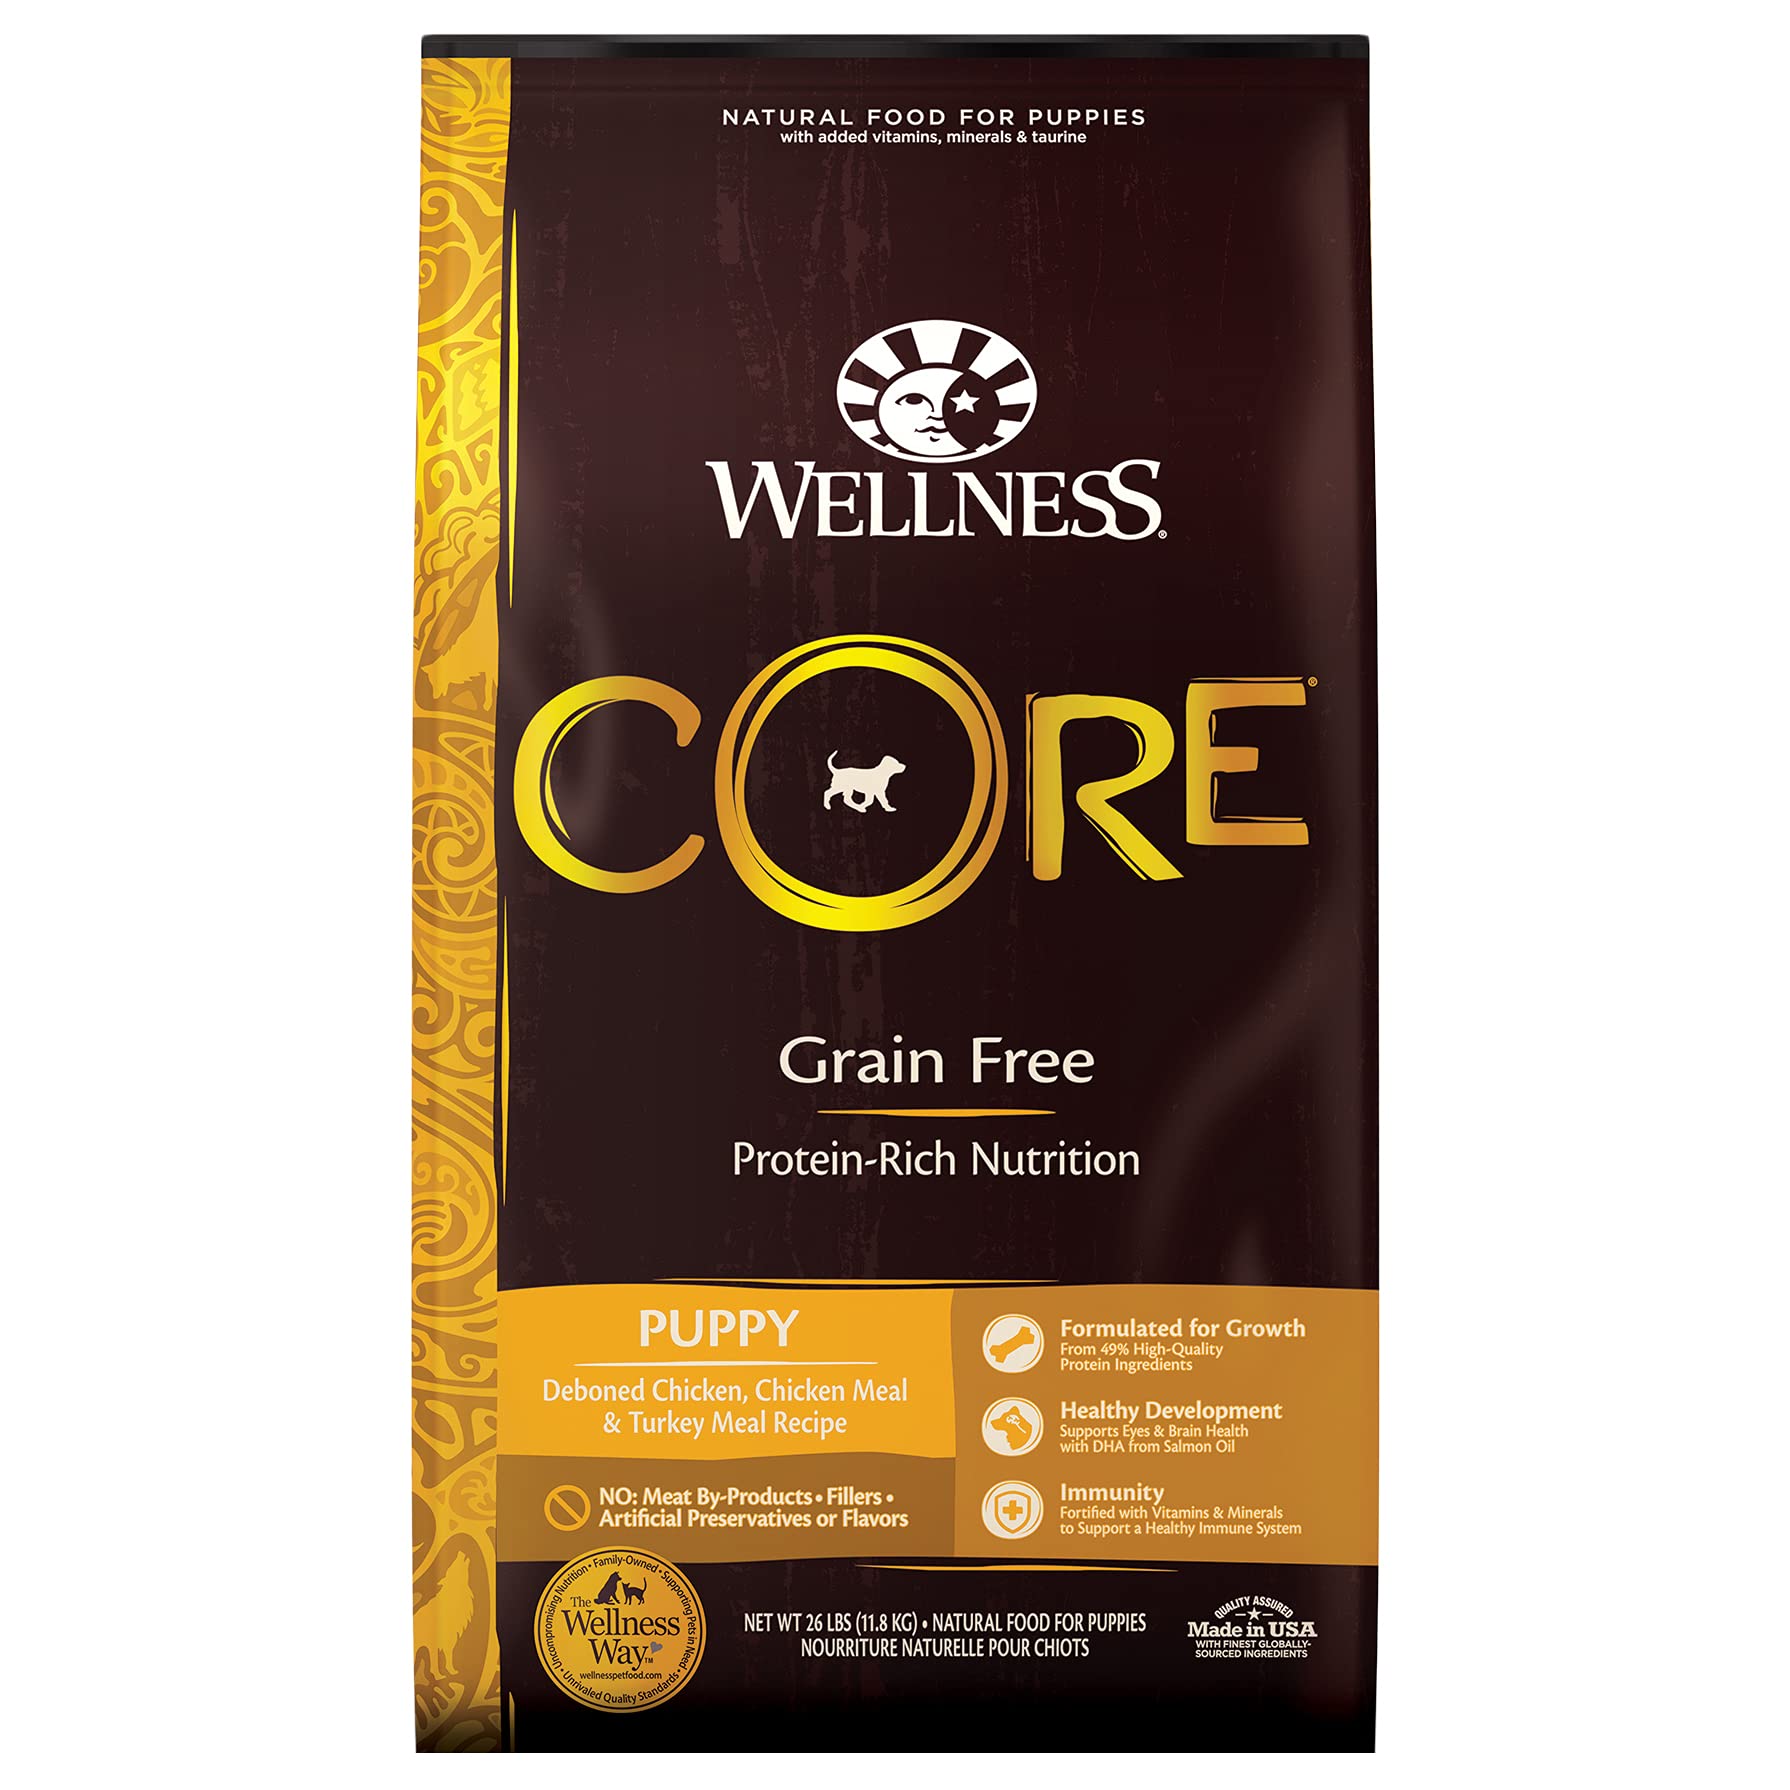 26-Lbs Wellness CORE Natural Grain Free Dry Dog Food (Puppy) $41.15 w/ S&S + Free Shipping